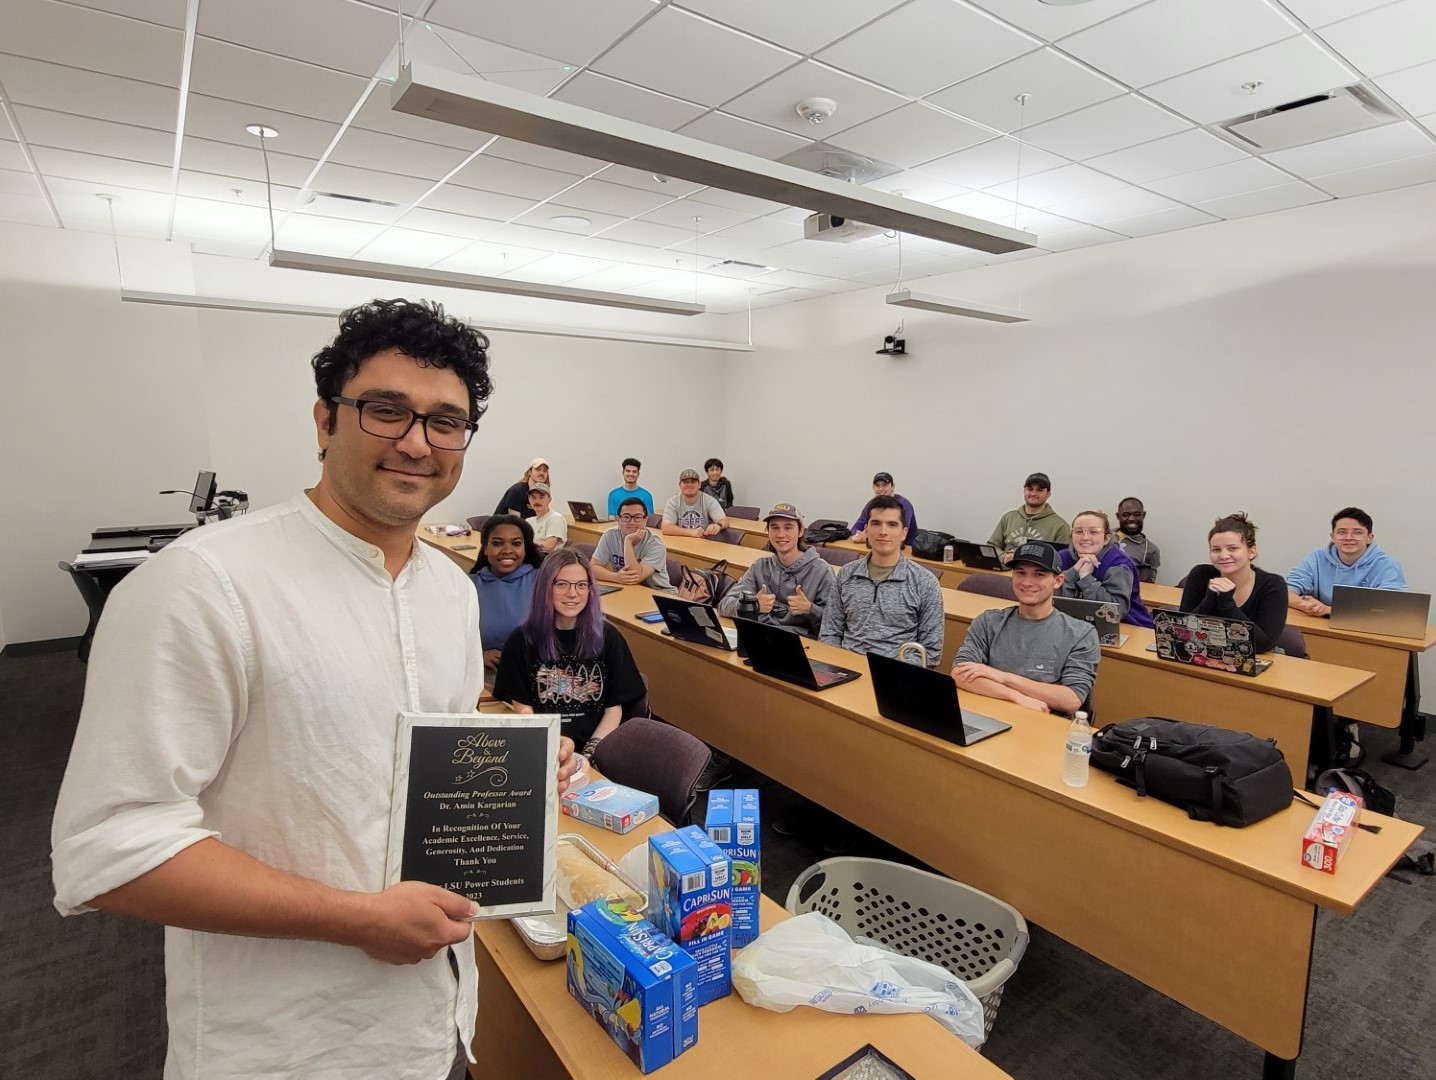 Dr. Kargarian holding up his Outstanding Professor award next to his students.